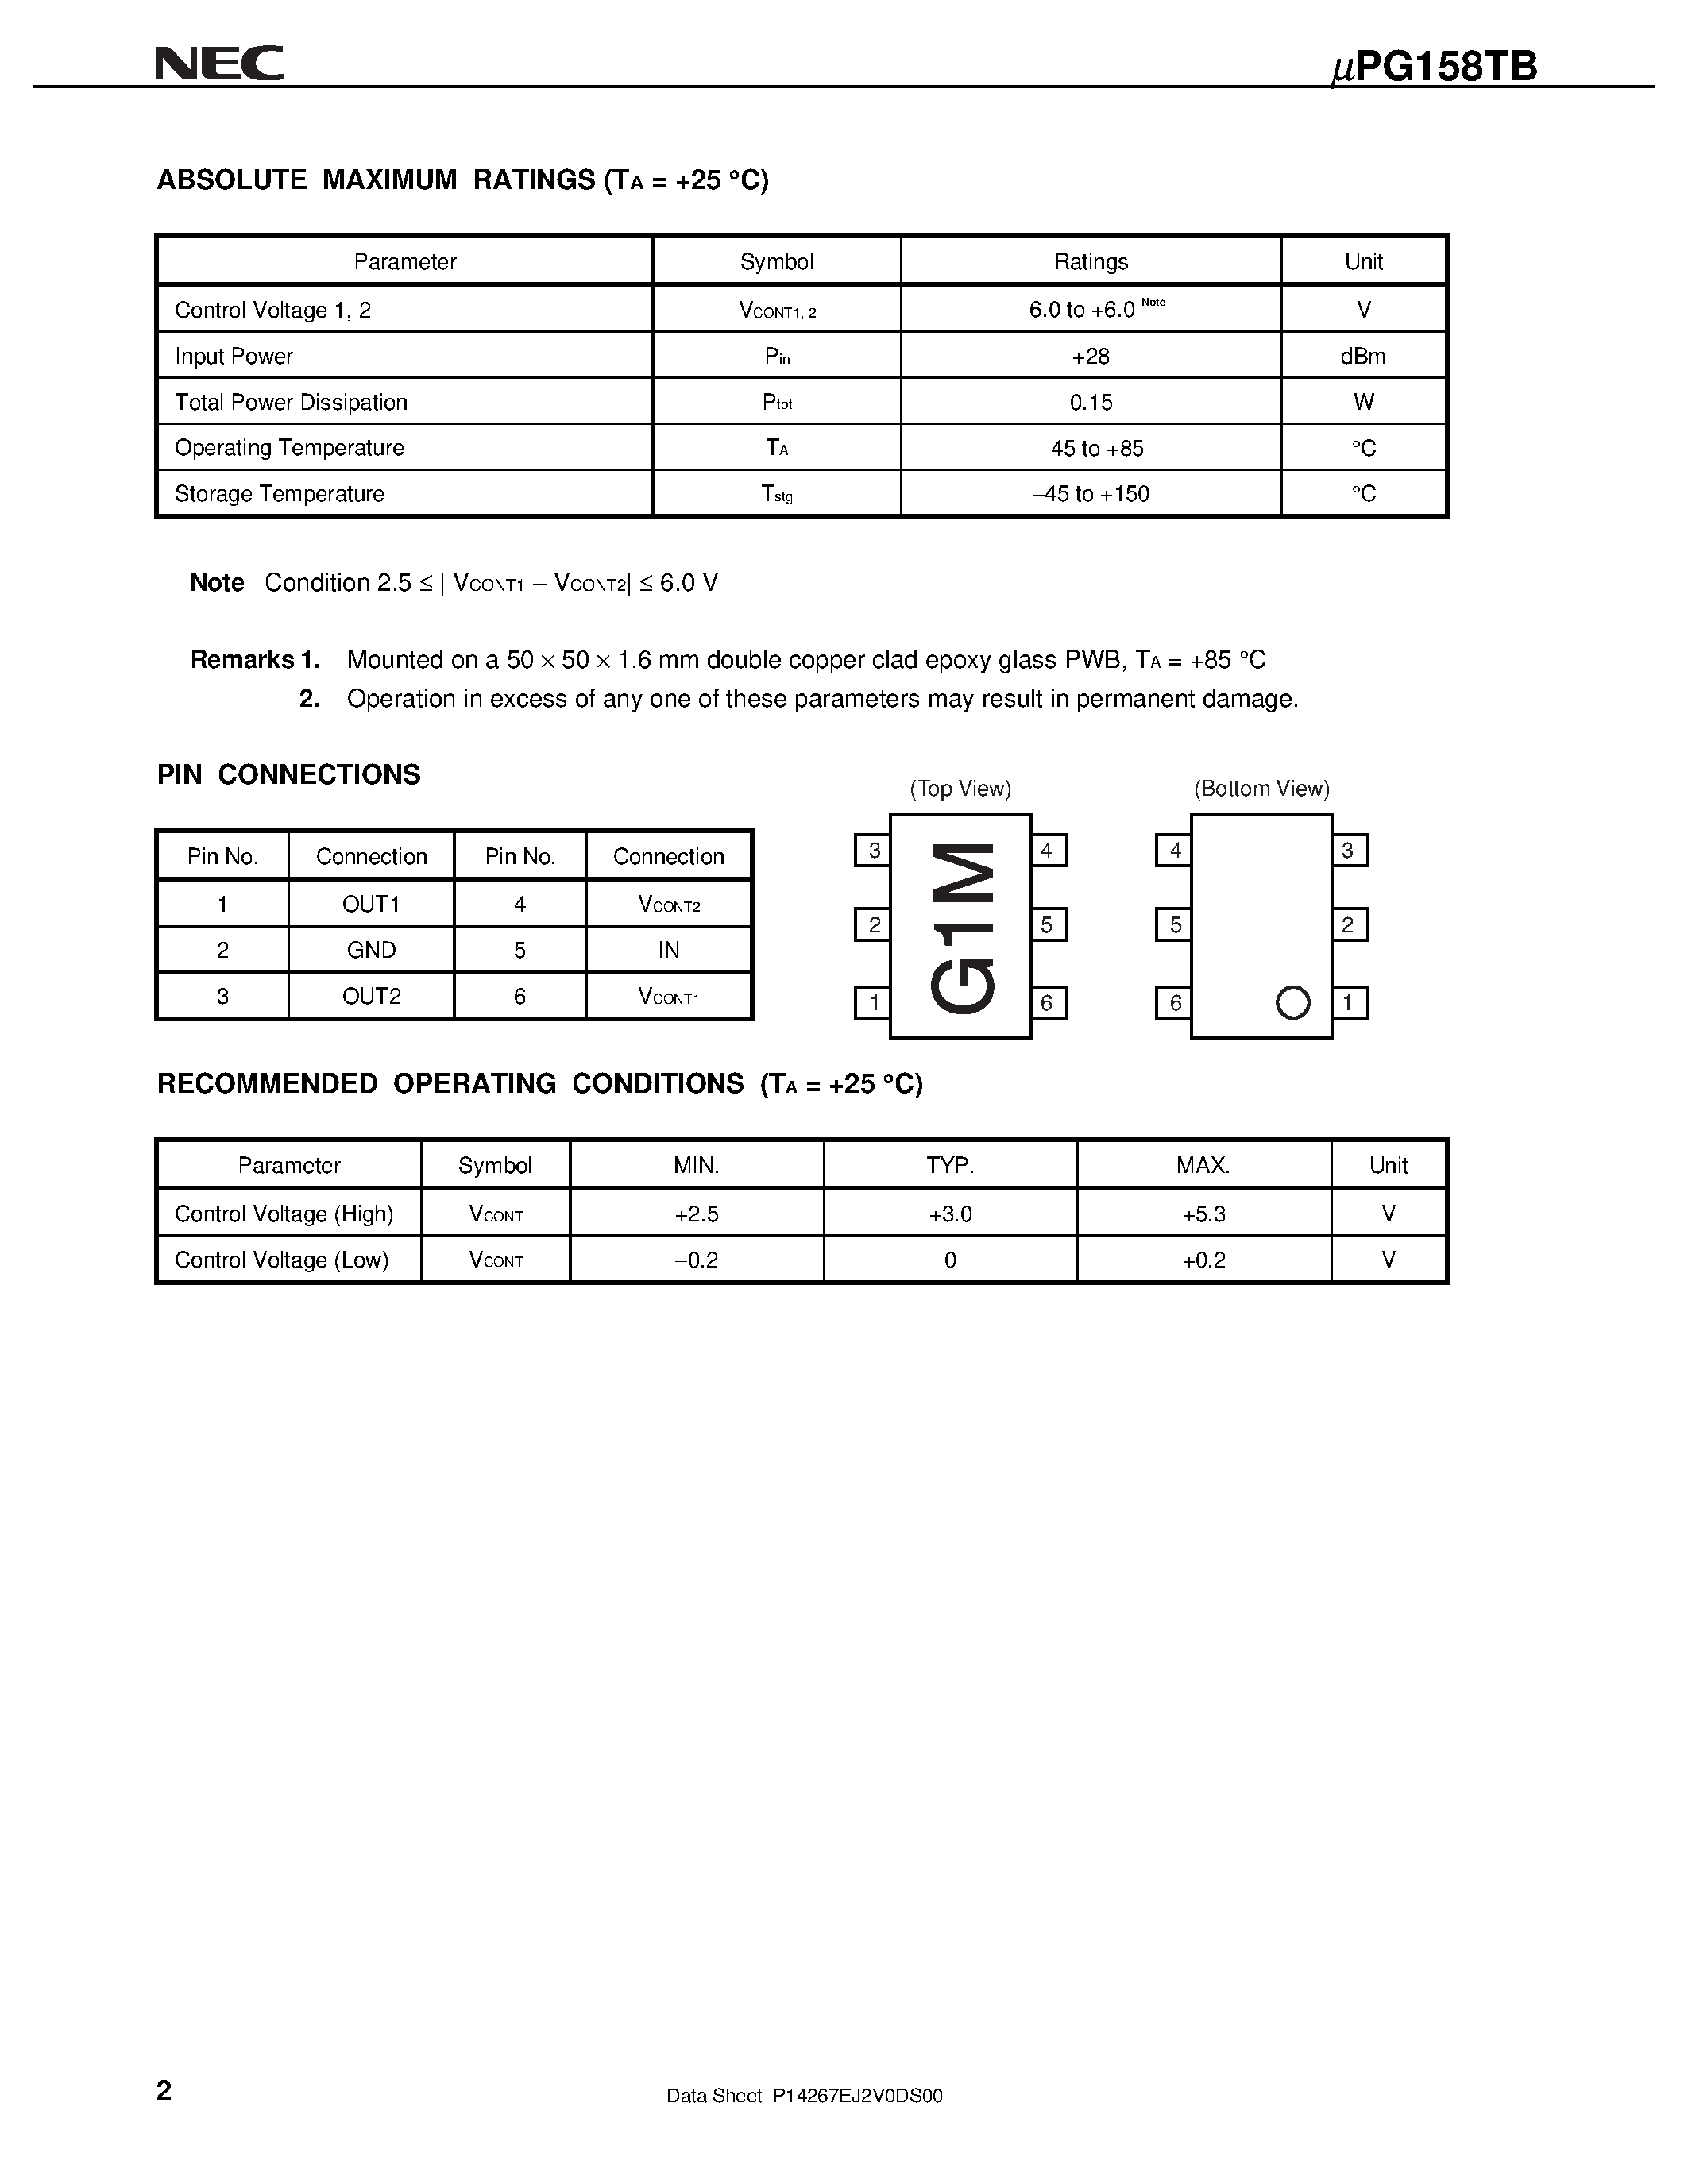 Datasheet UPG158TB-E3 - L/ S- BAND SPDT SWITCH page 2